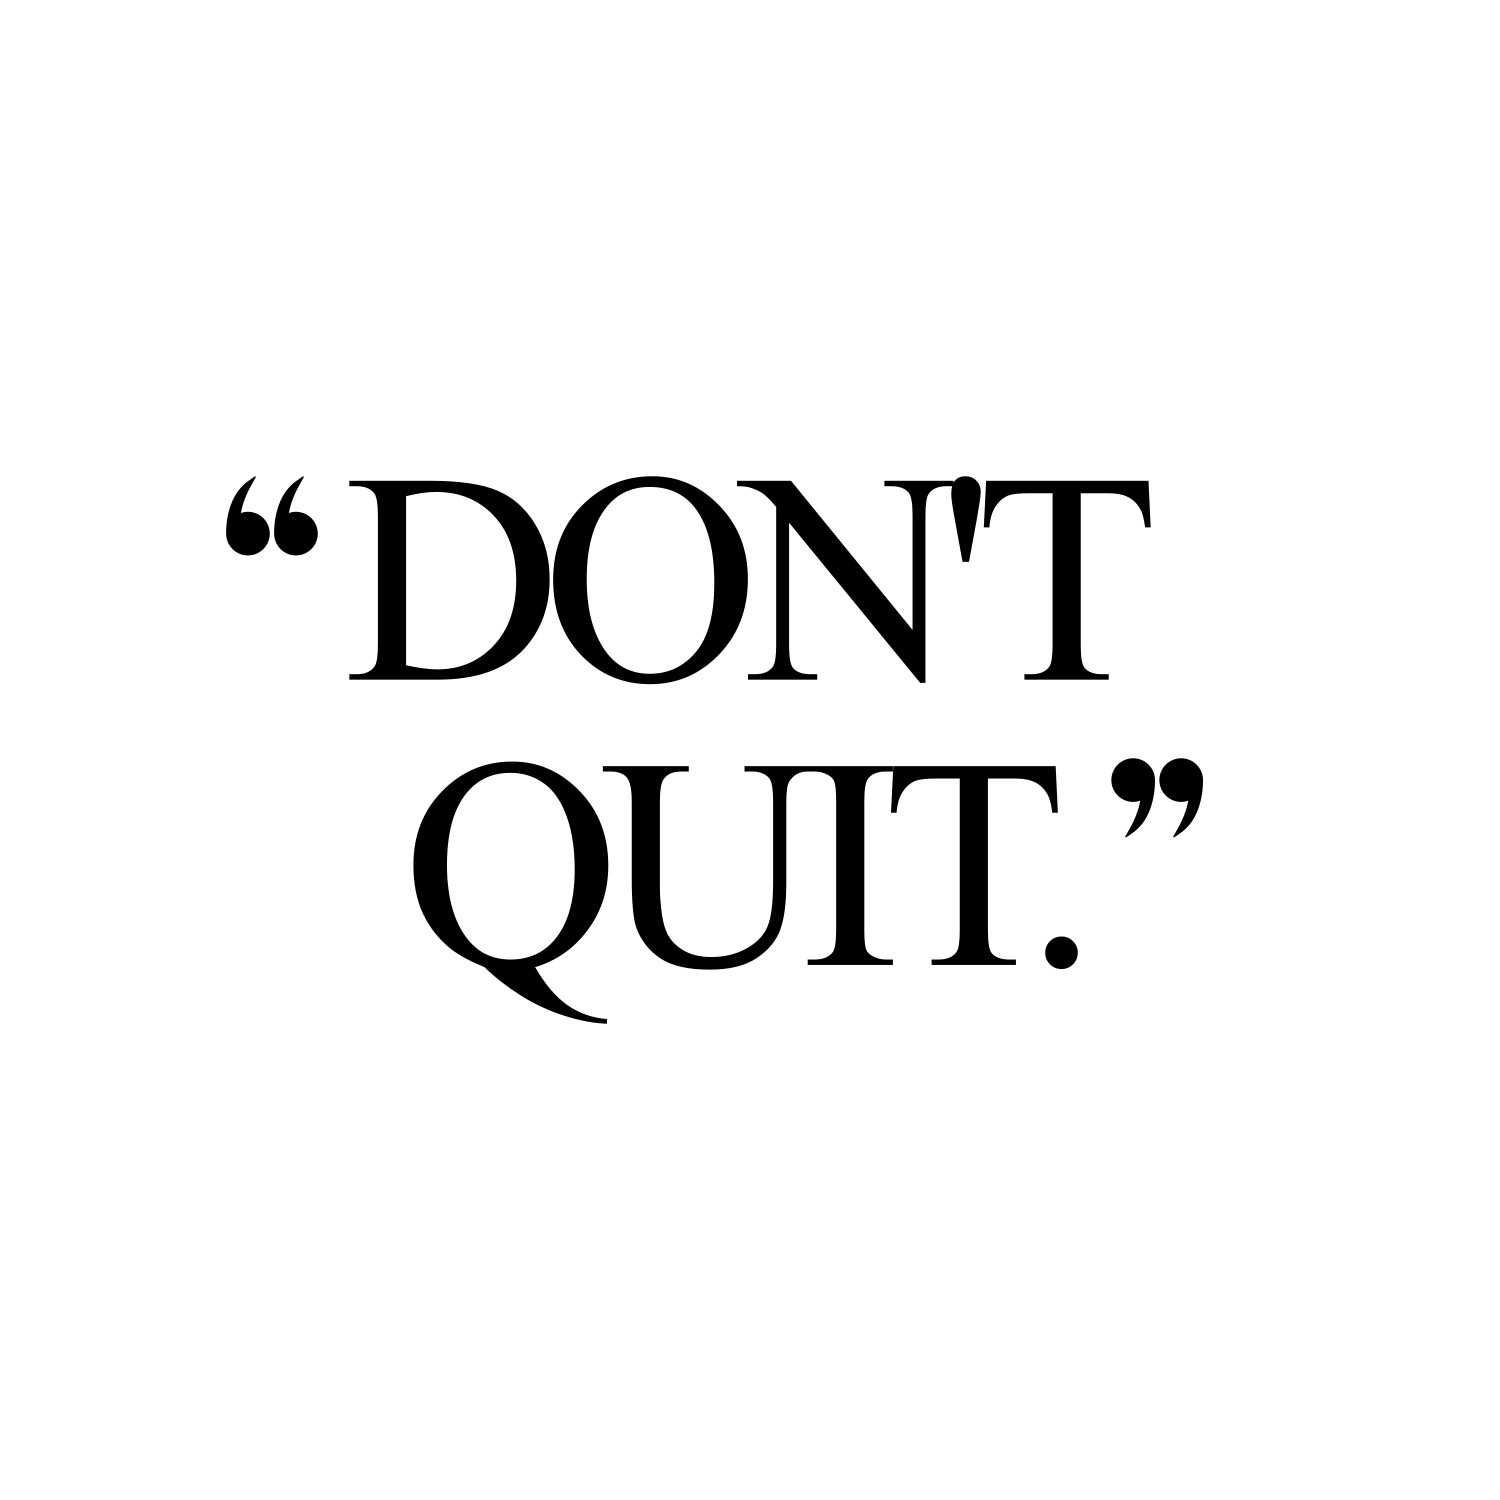 Don't quit! Browse our collection of motivational fitness and weight loss quotes and get instant exercise and training inspiration. Transform positive thoughts into positive actions and get fit, healthy and happy! https://www.spotebi.com/workout-motivation/dont-quit/